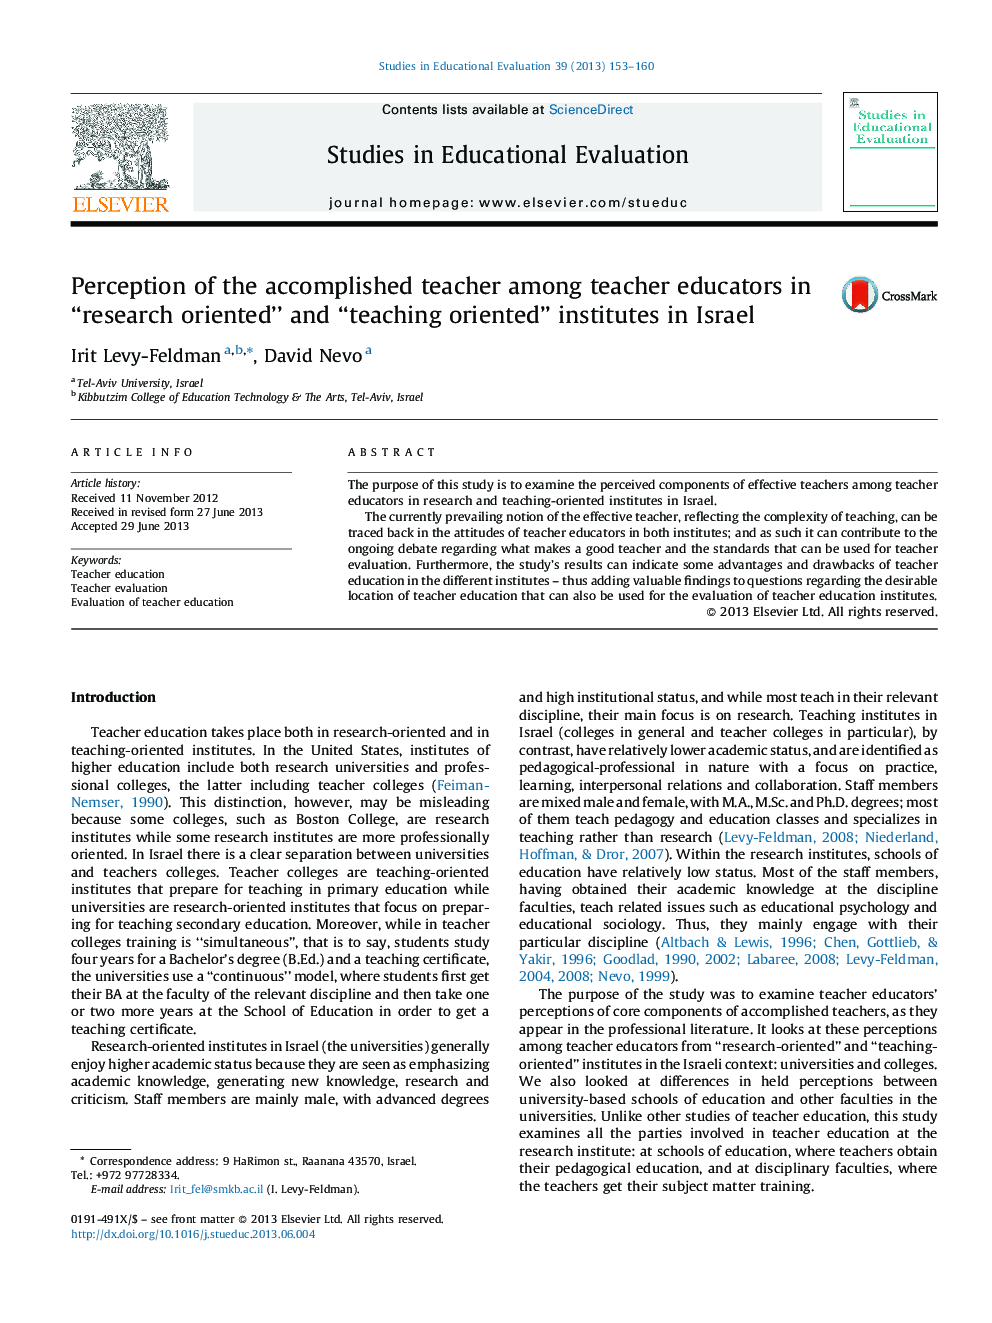 Perception of the accomplished teacher among teacher educators in “research oriented” and “teaching oriented” institutes in Israel